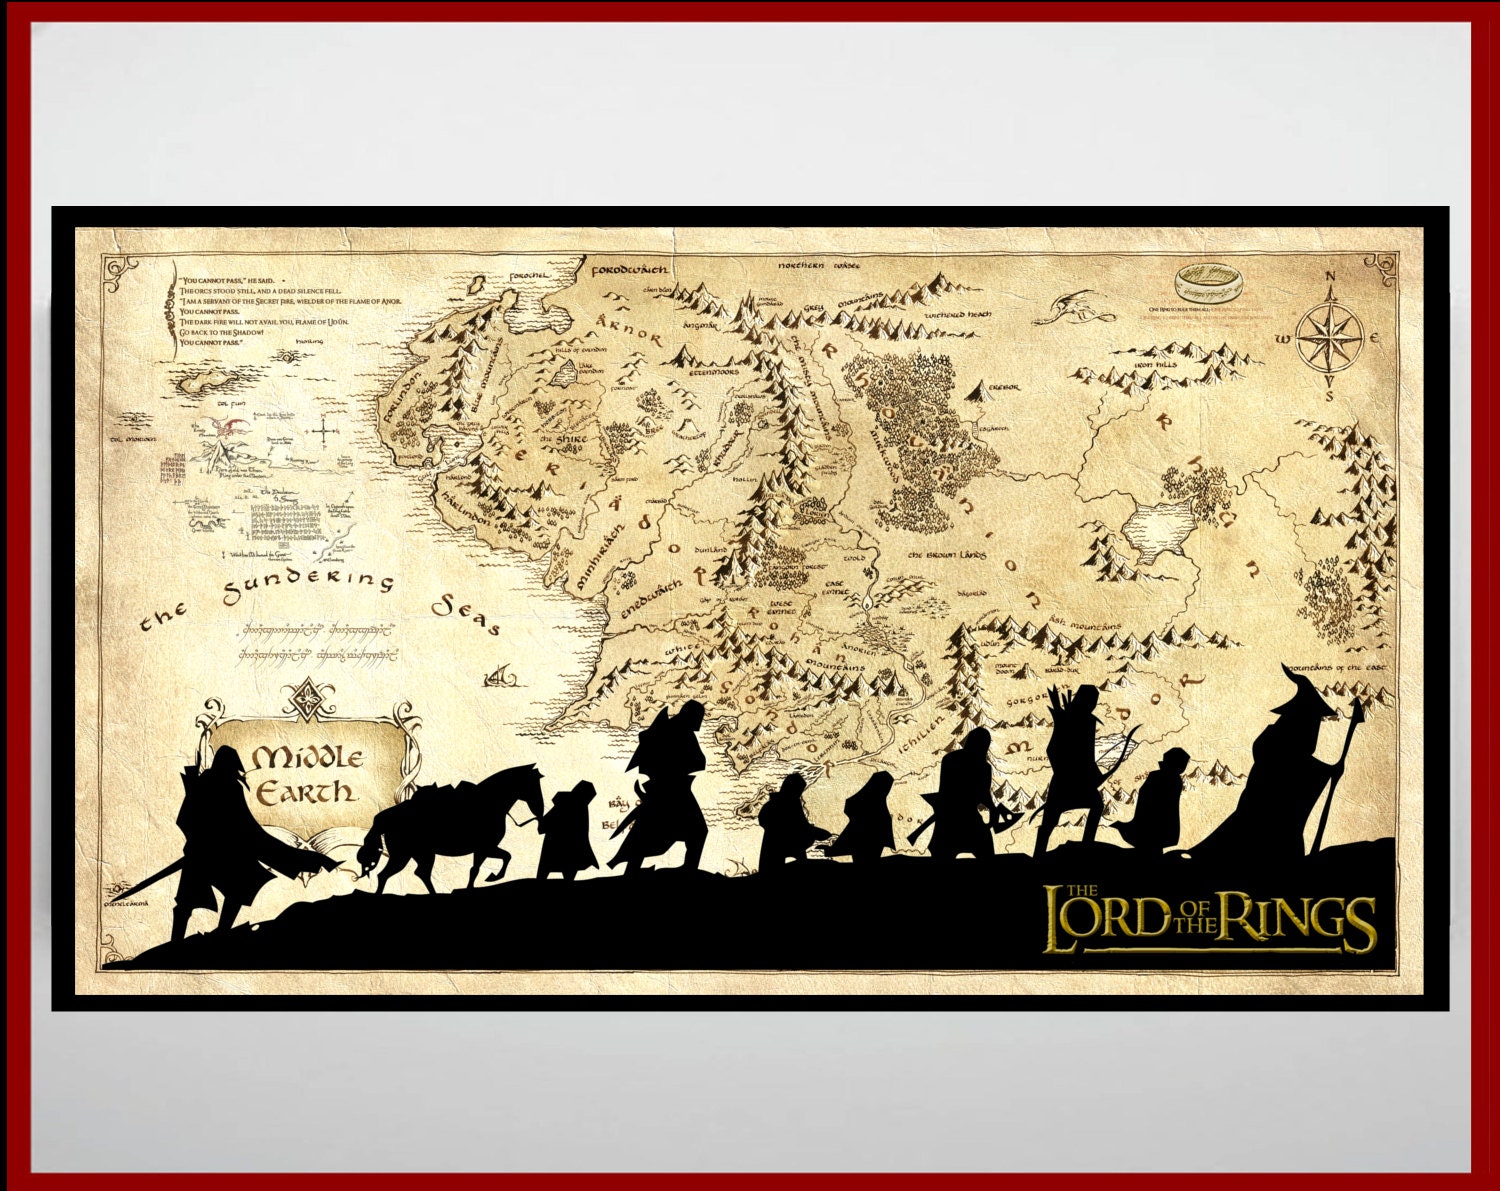 Lord Of The Rings Middle Earth Map The Hobbit by ArtOfWatercolour